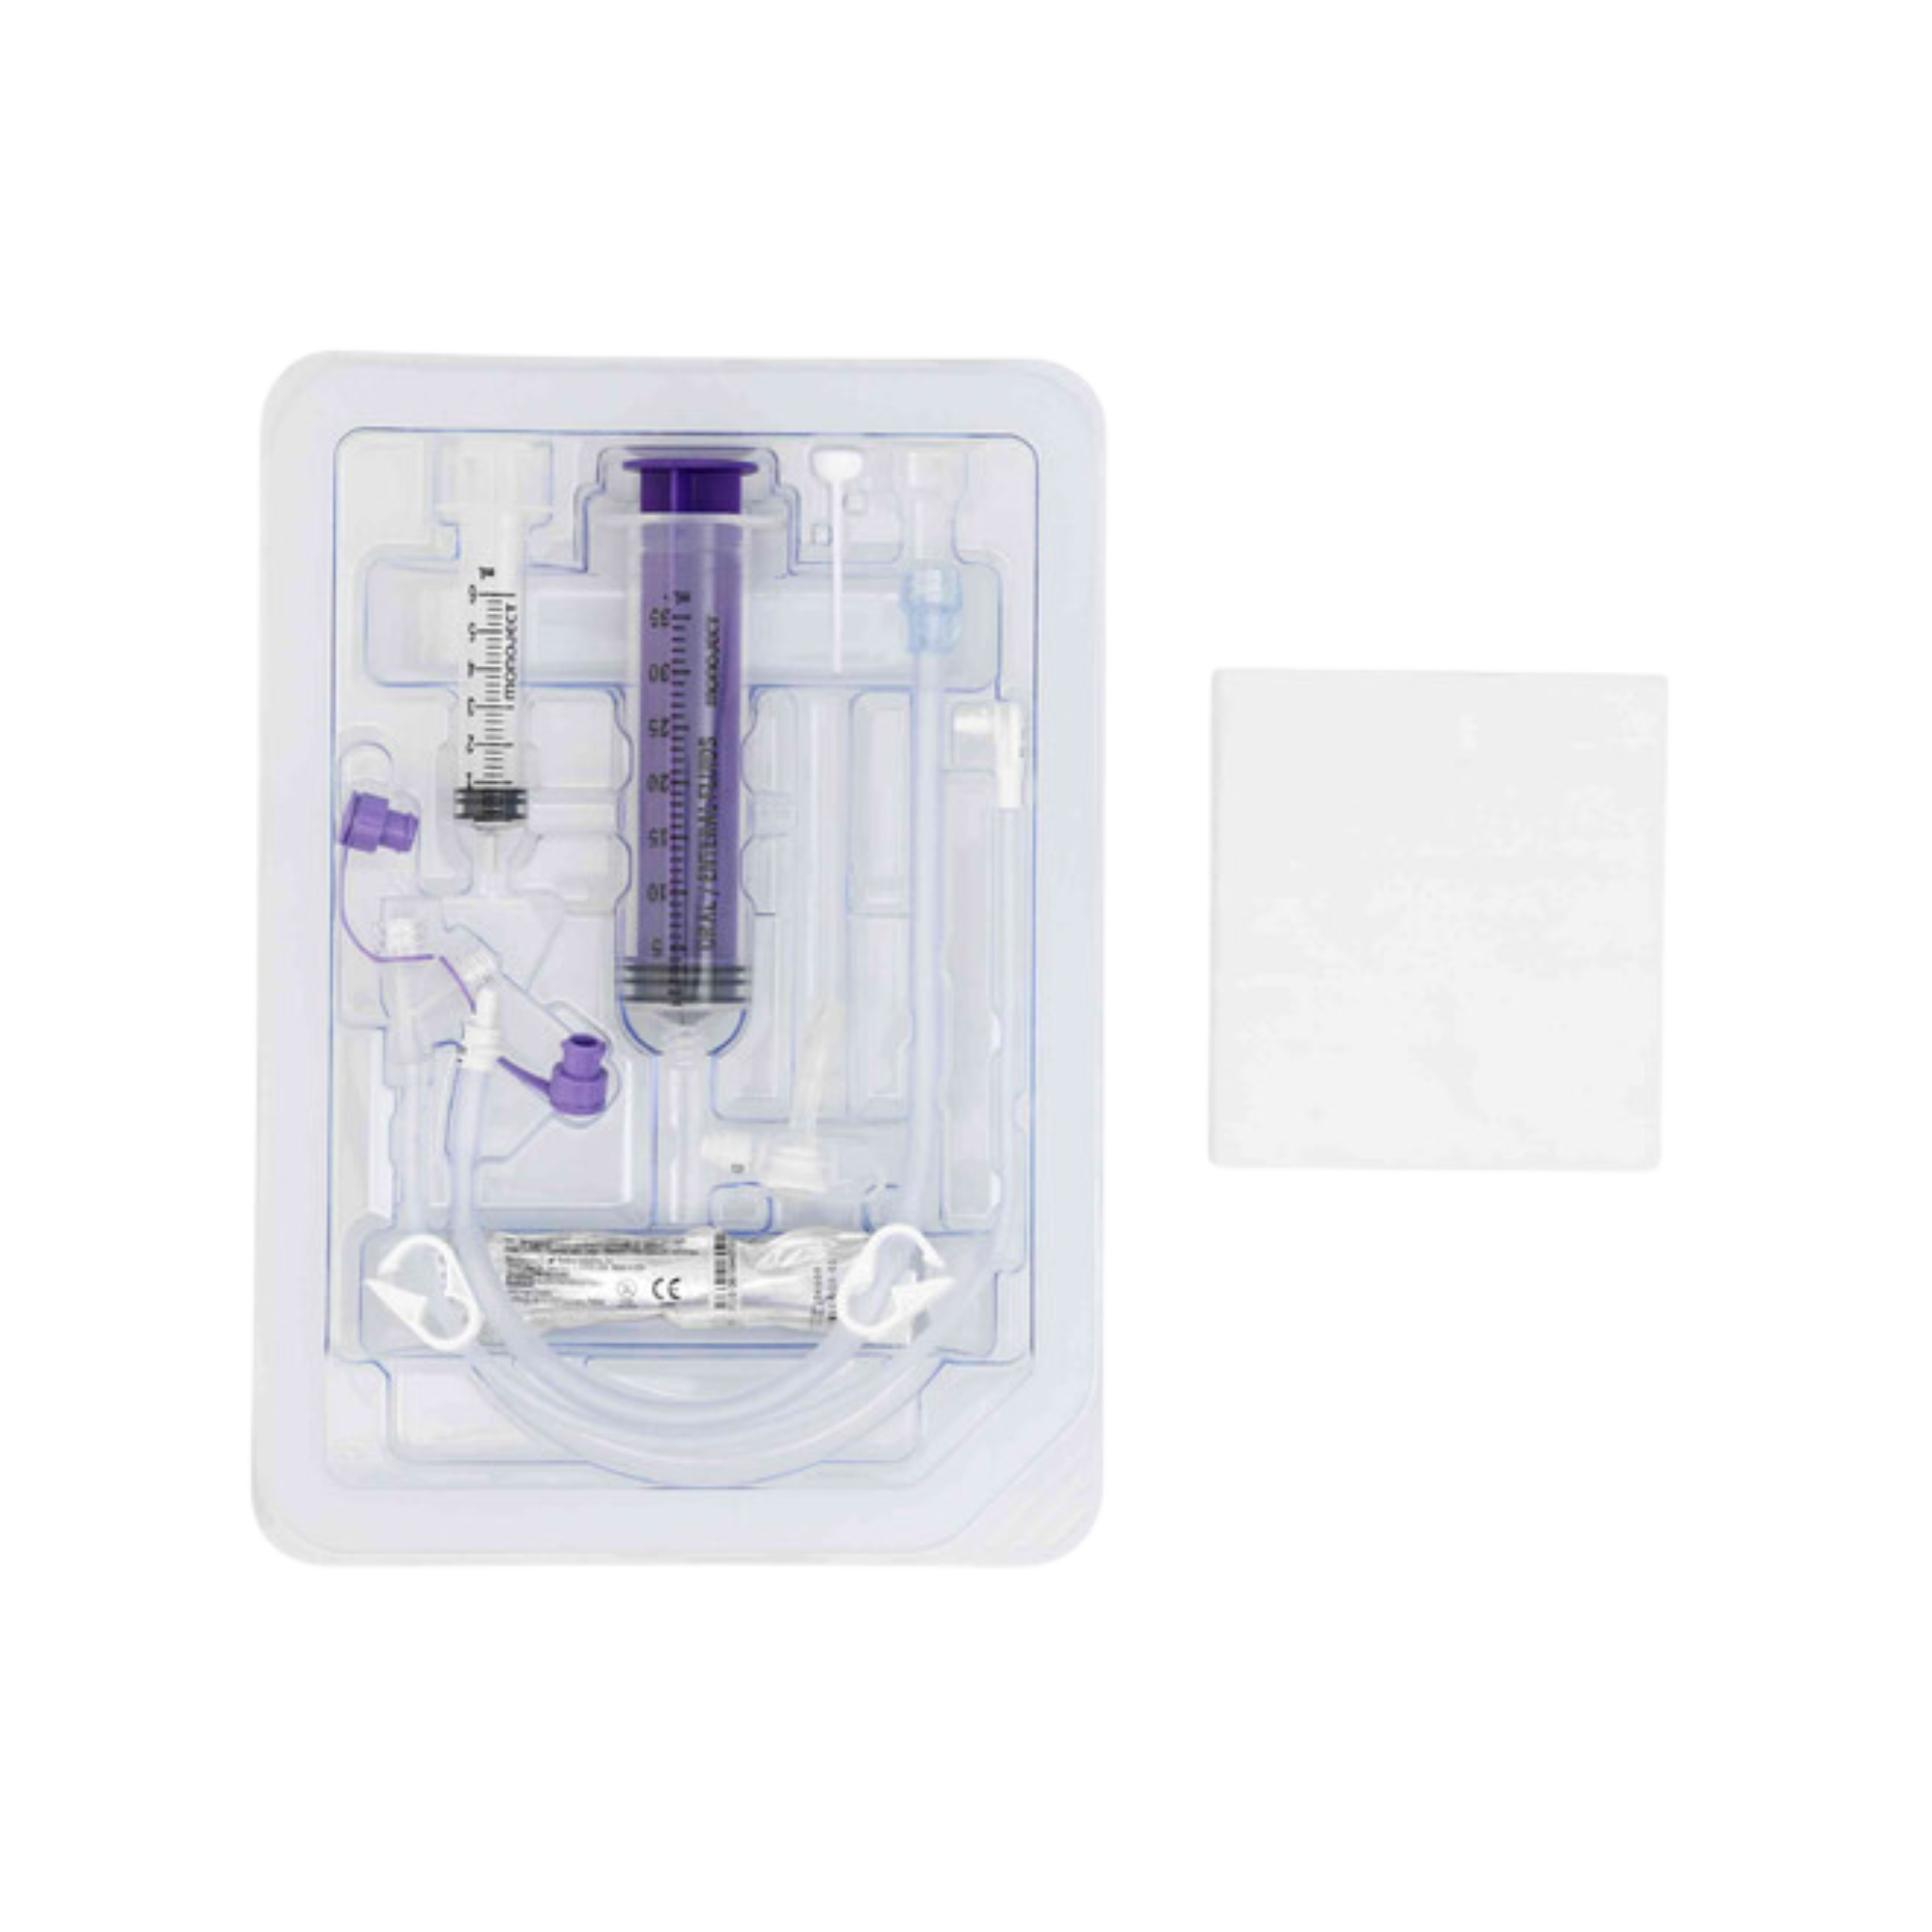 Avanos Mic-Key 18Fr Low-Profile Balloon Gastrostomy Feeding Tube Extension Sets With Enfit Connectors - All Lengths